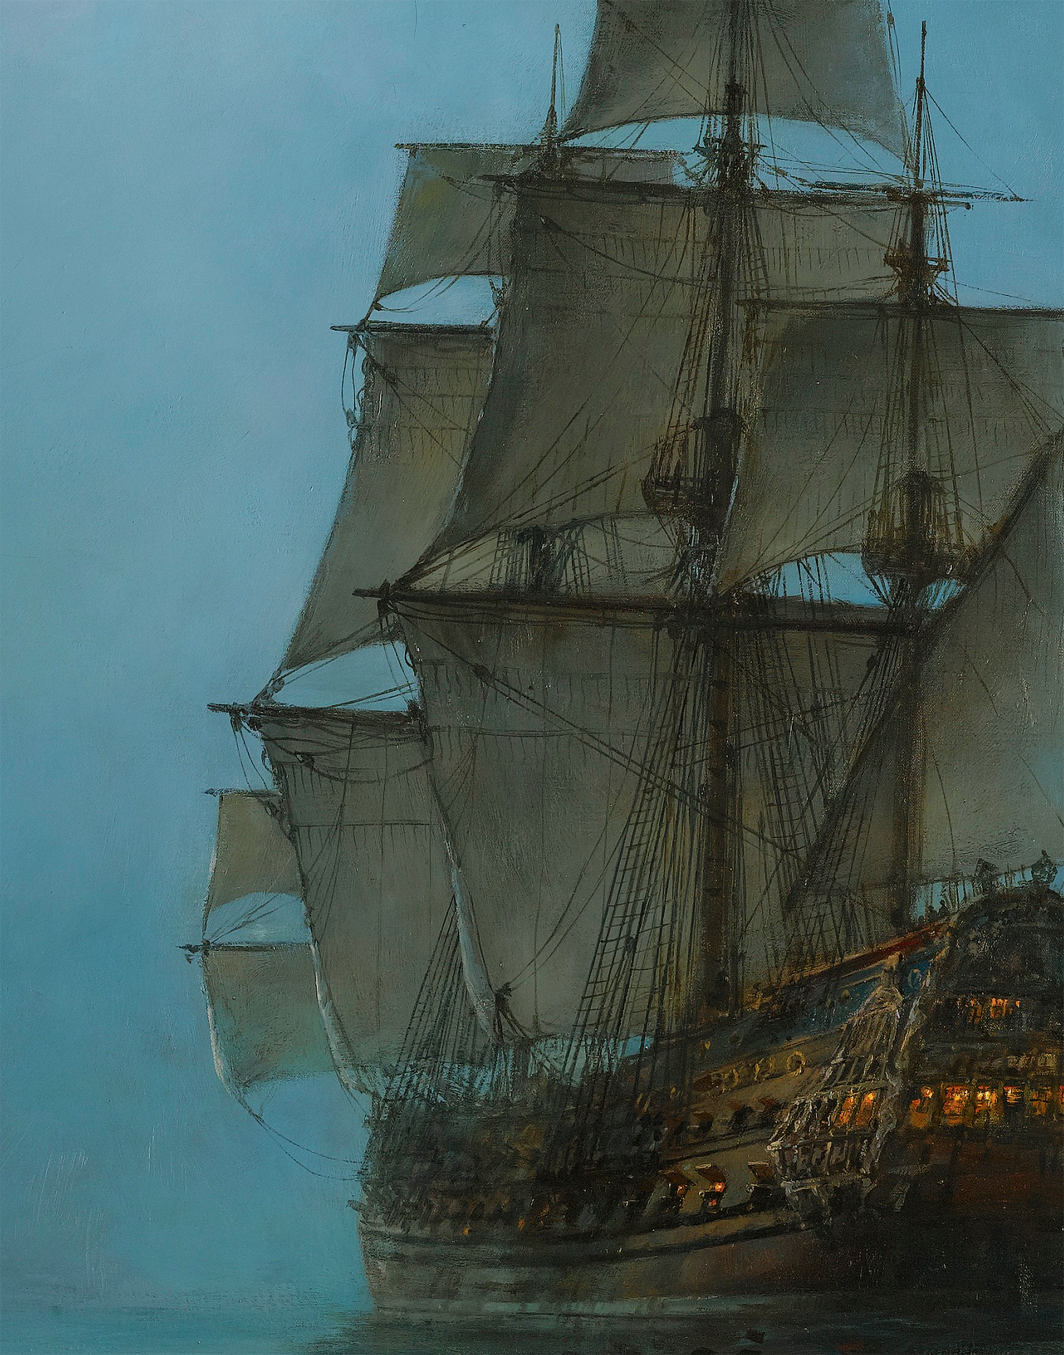 paintingses:
“ “ The Crescent Moon (detail) by Montague Dawson (1895-1973)
oil on canvas, date unknown (early 20th century maybe?)
” ”